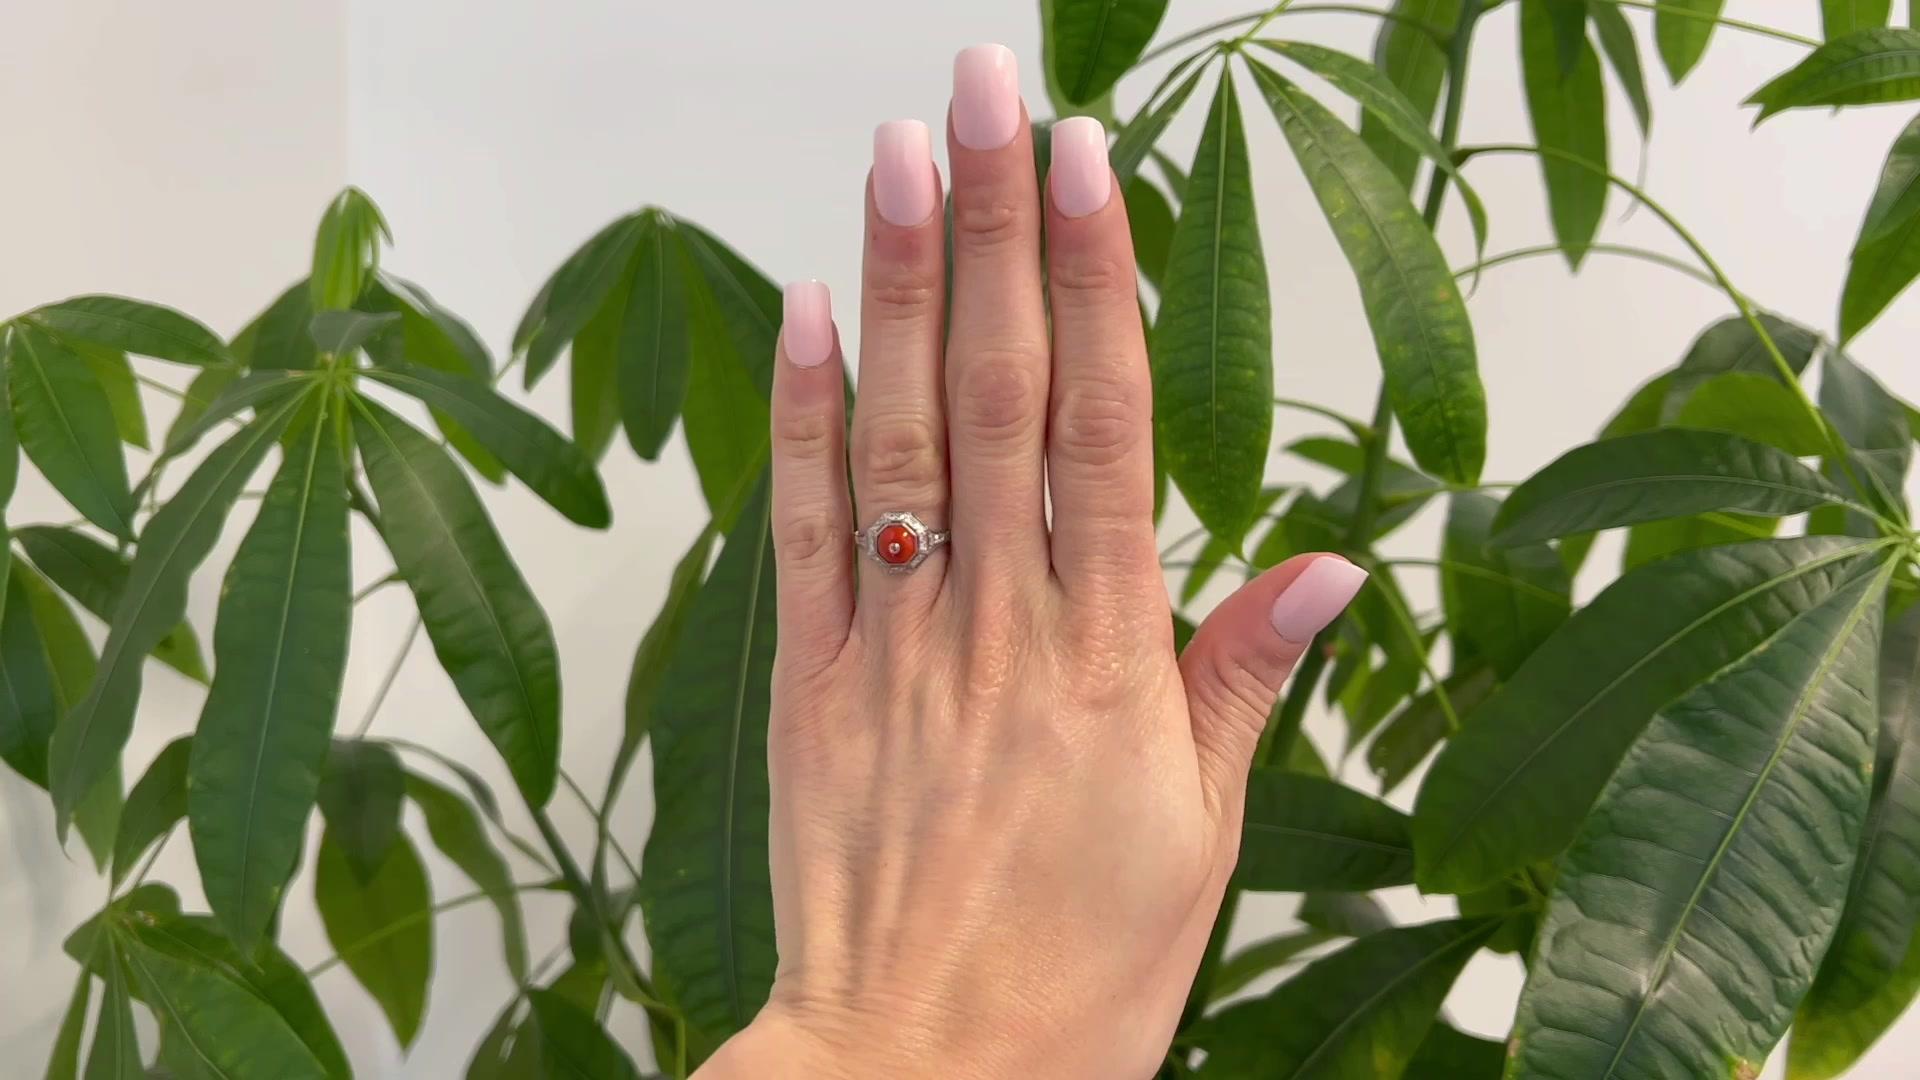 One Art Deco Inspired Coral Diamond Platinum Ring. Featuring one cabochon cut coral piece. Accented by 22 single cut diamonds with a total weight of approximately 0.30 carat, graded F color, VS clarity. Crafted in platinum with purity marks. Circa